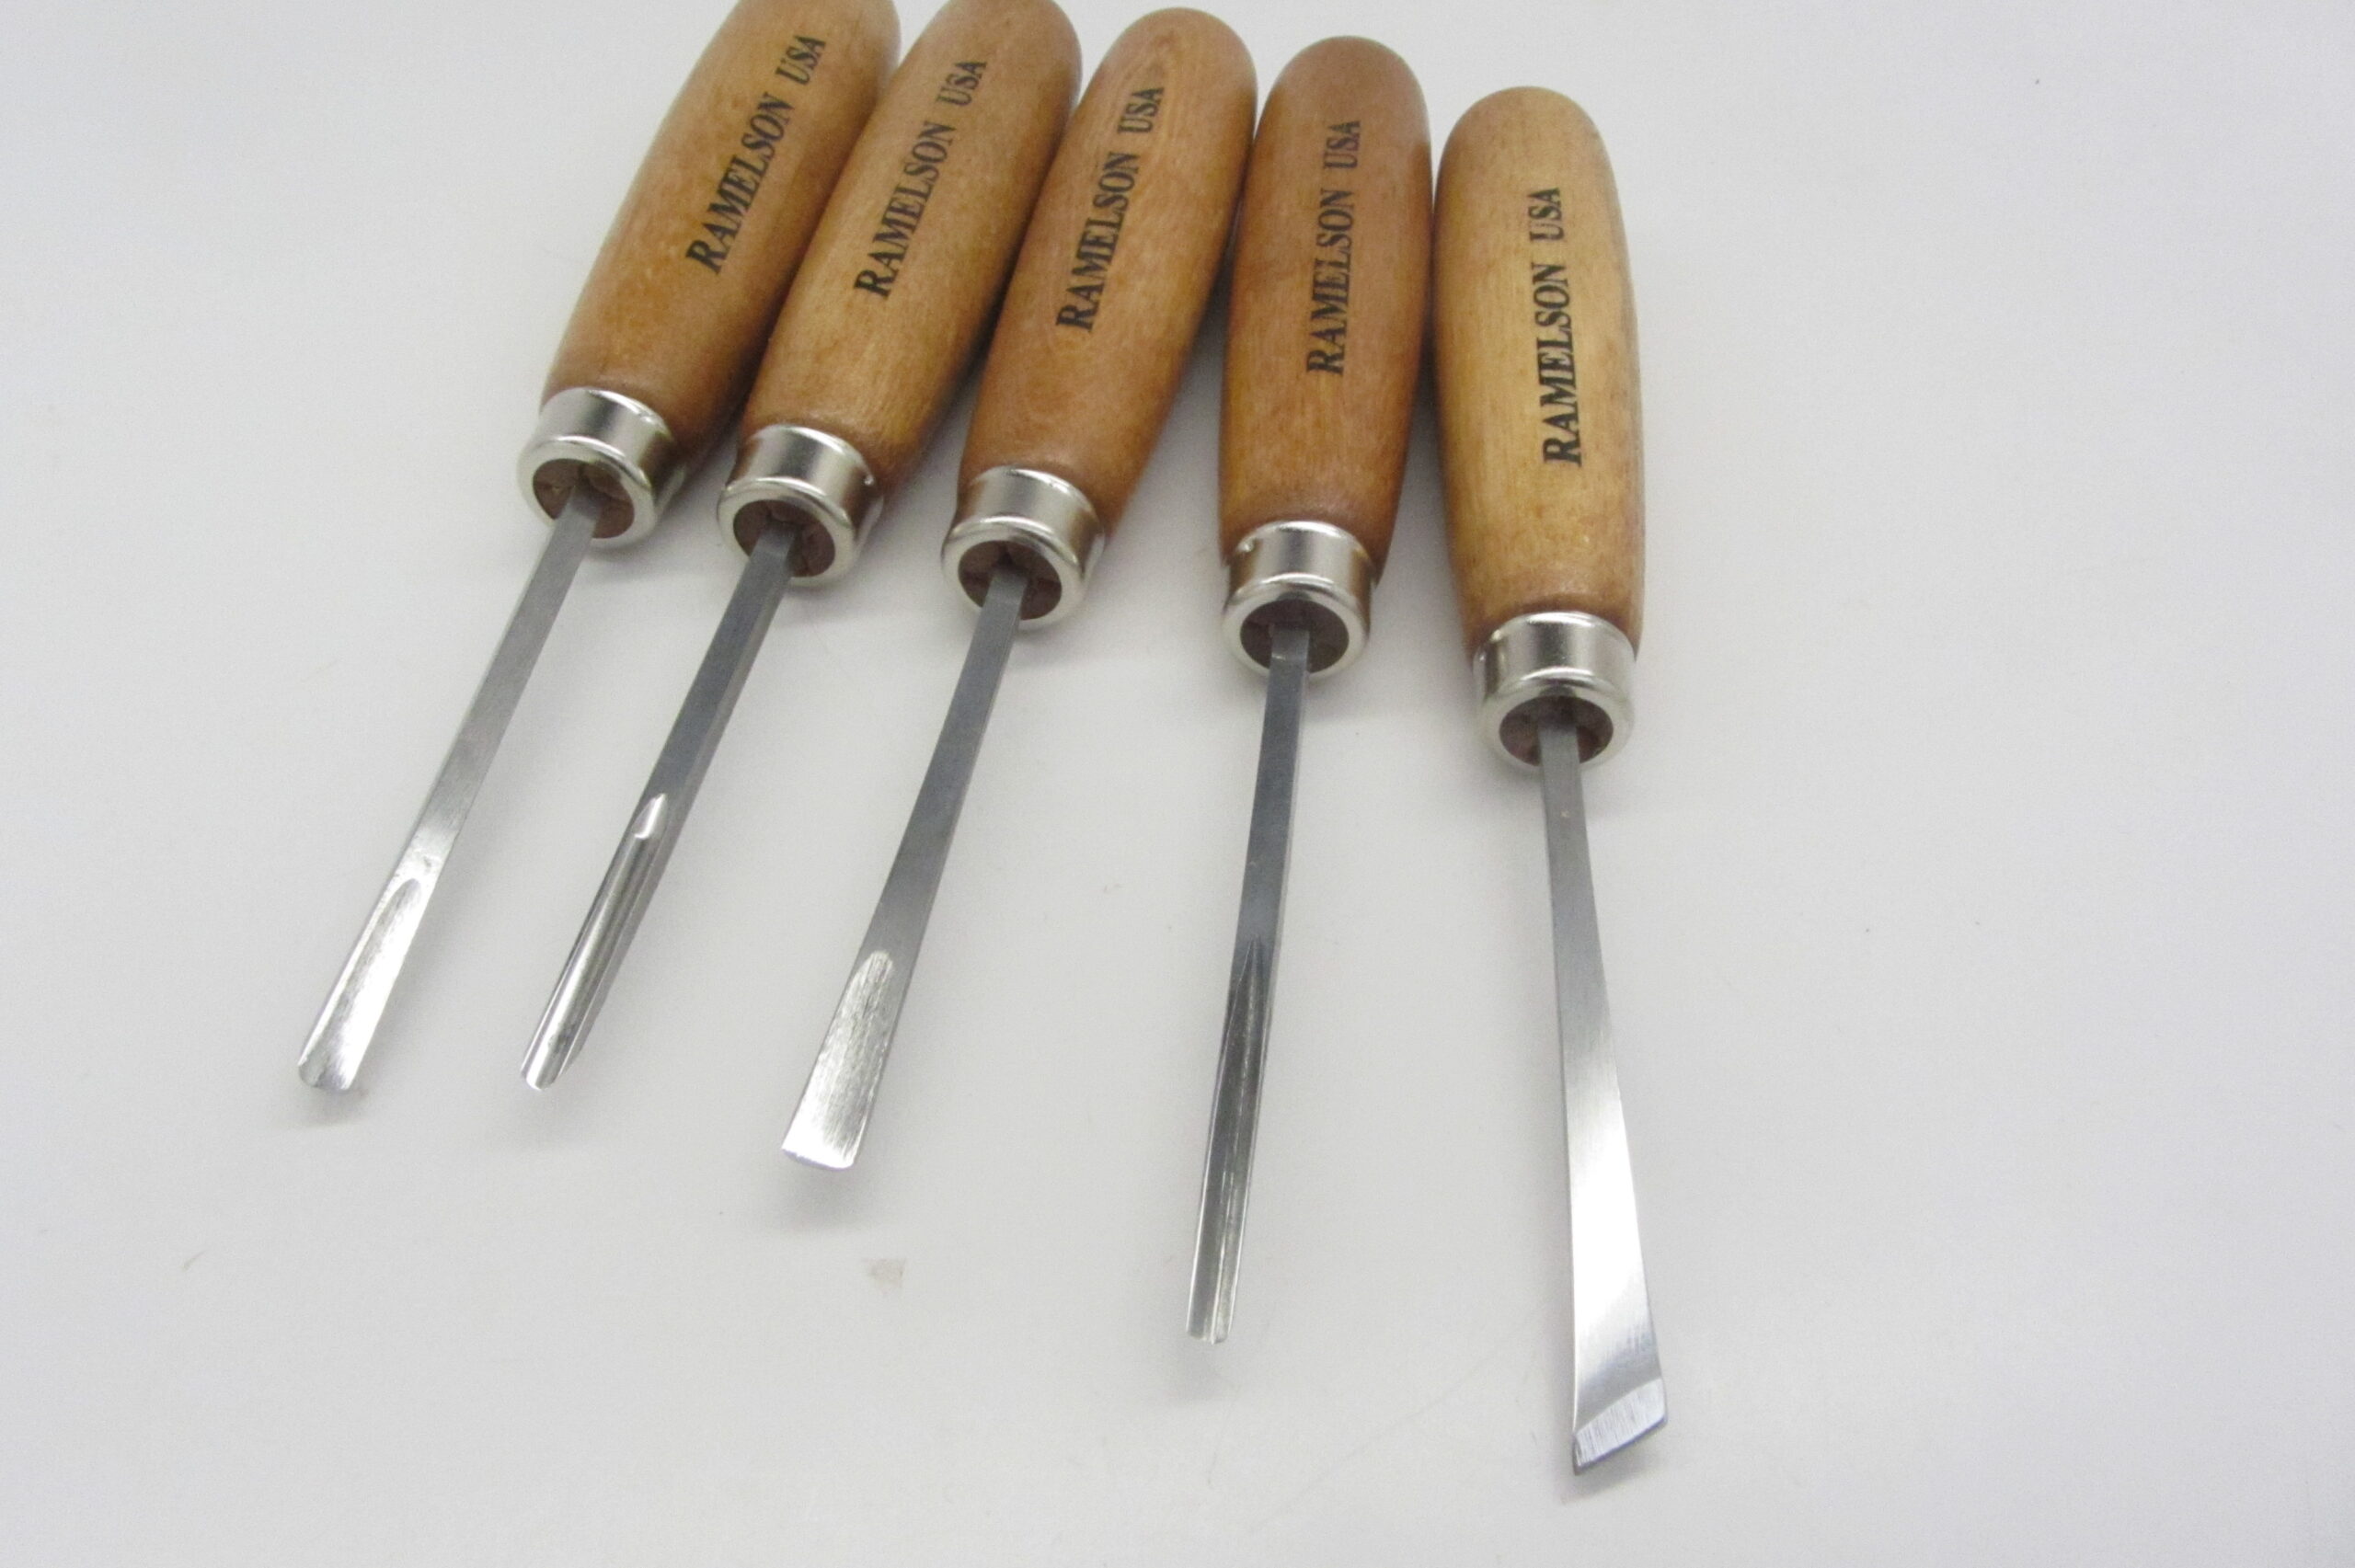 Ramelson Wood Carving Tools 5 PC Set Whittling & Chip Knives Woodworking Tools